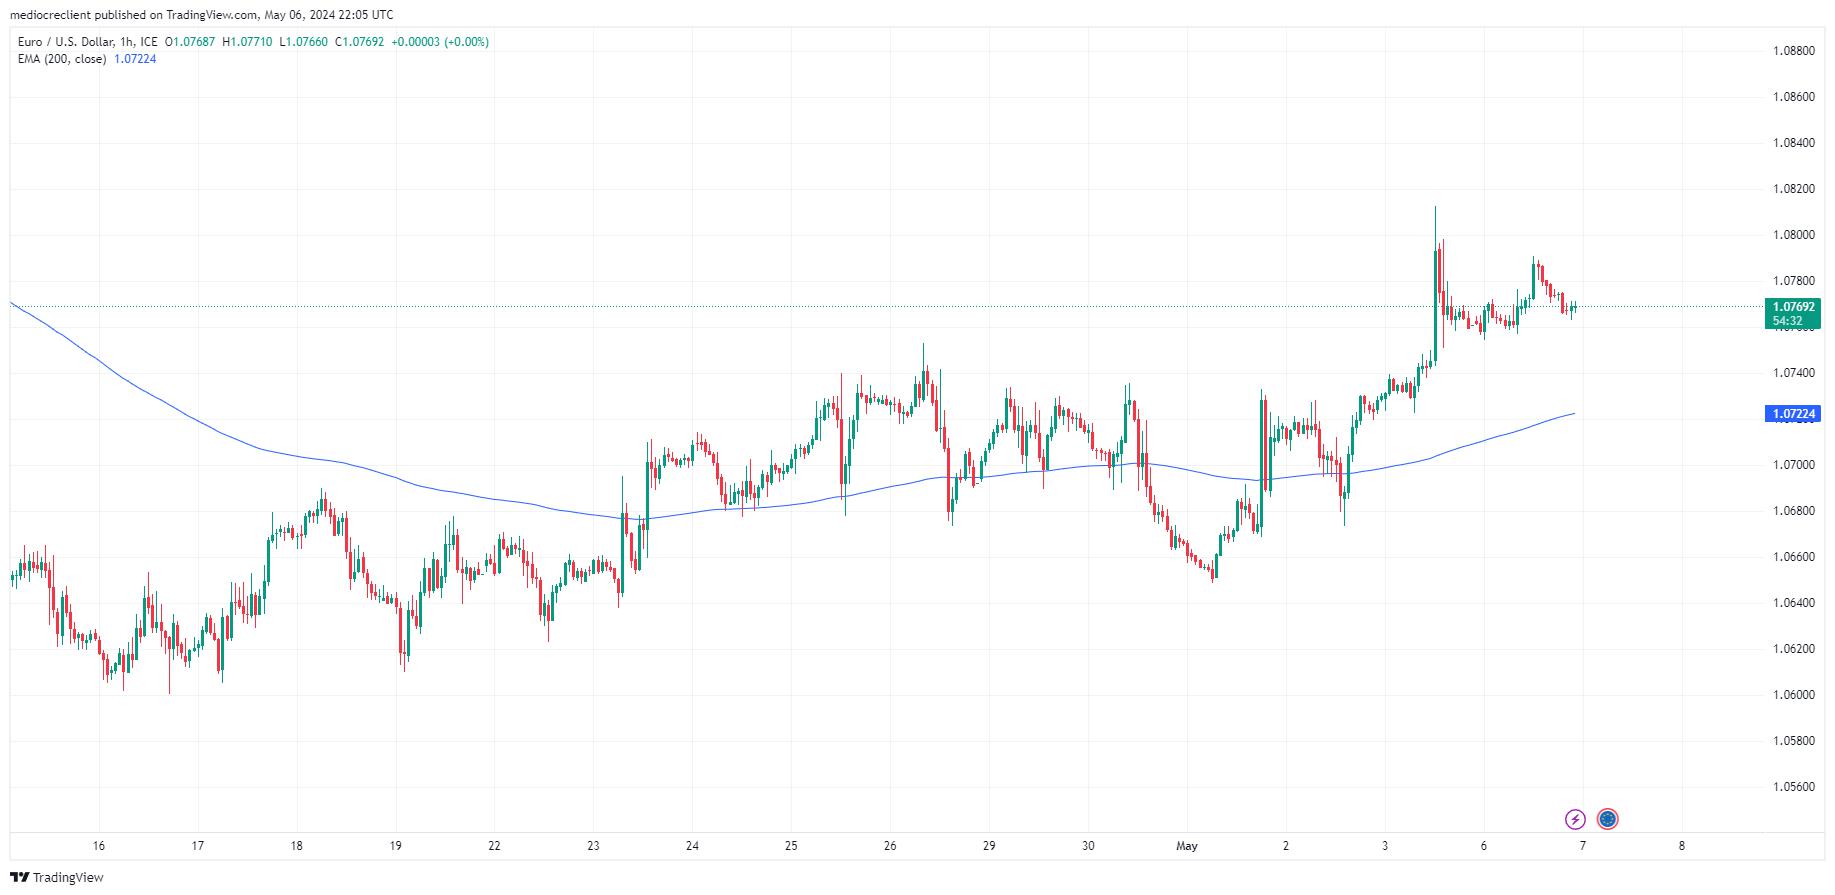 EUR/USD propped up near 1.0750 ahead of European Retail Sales